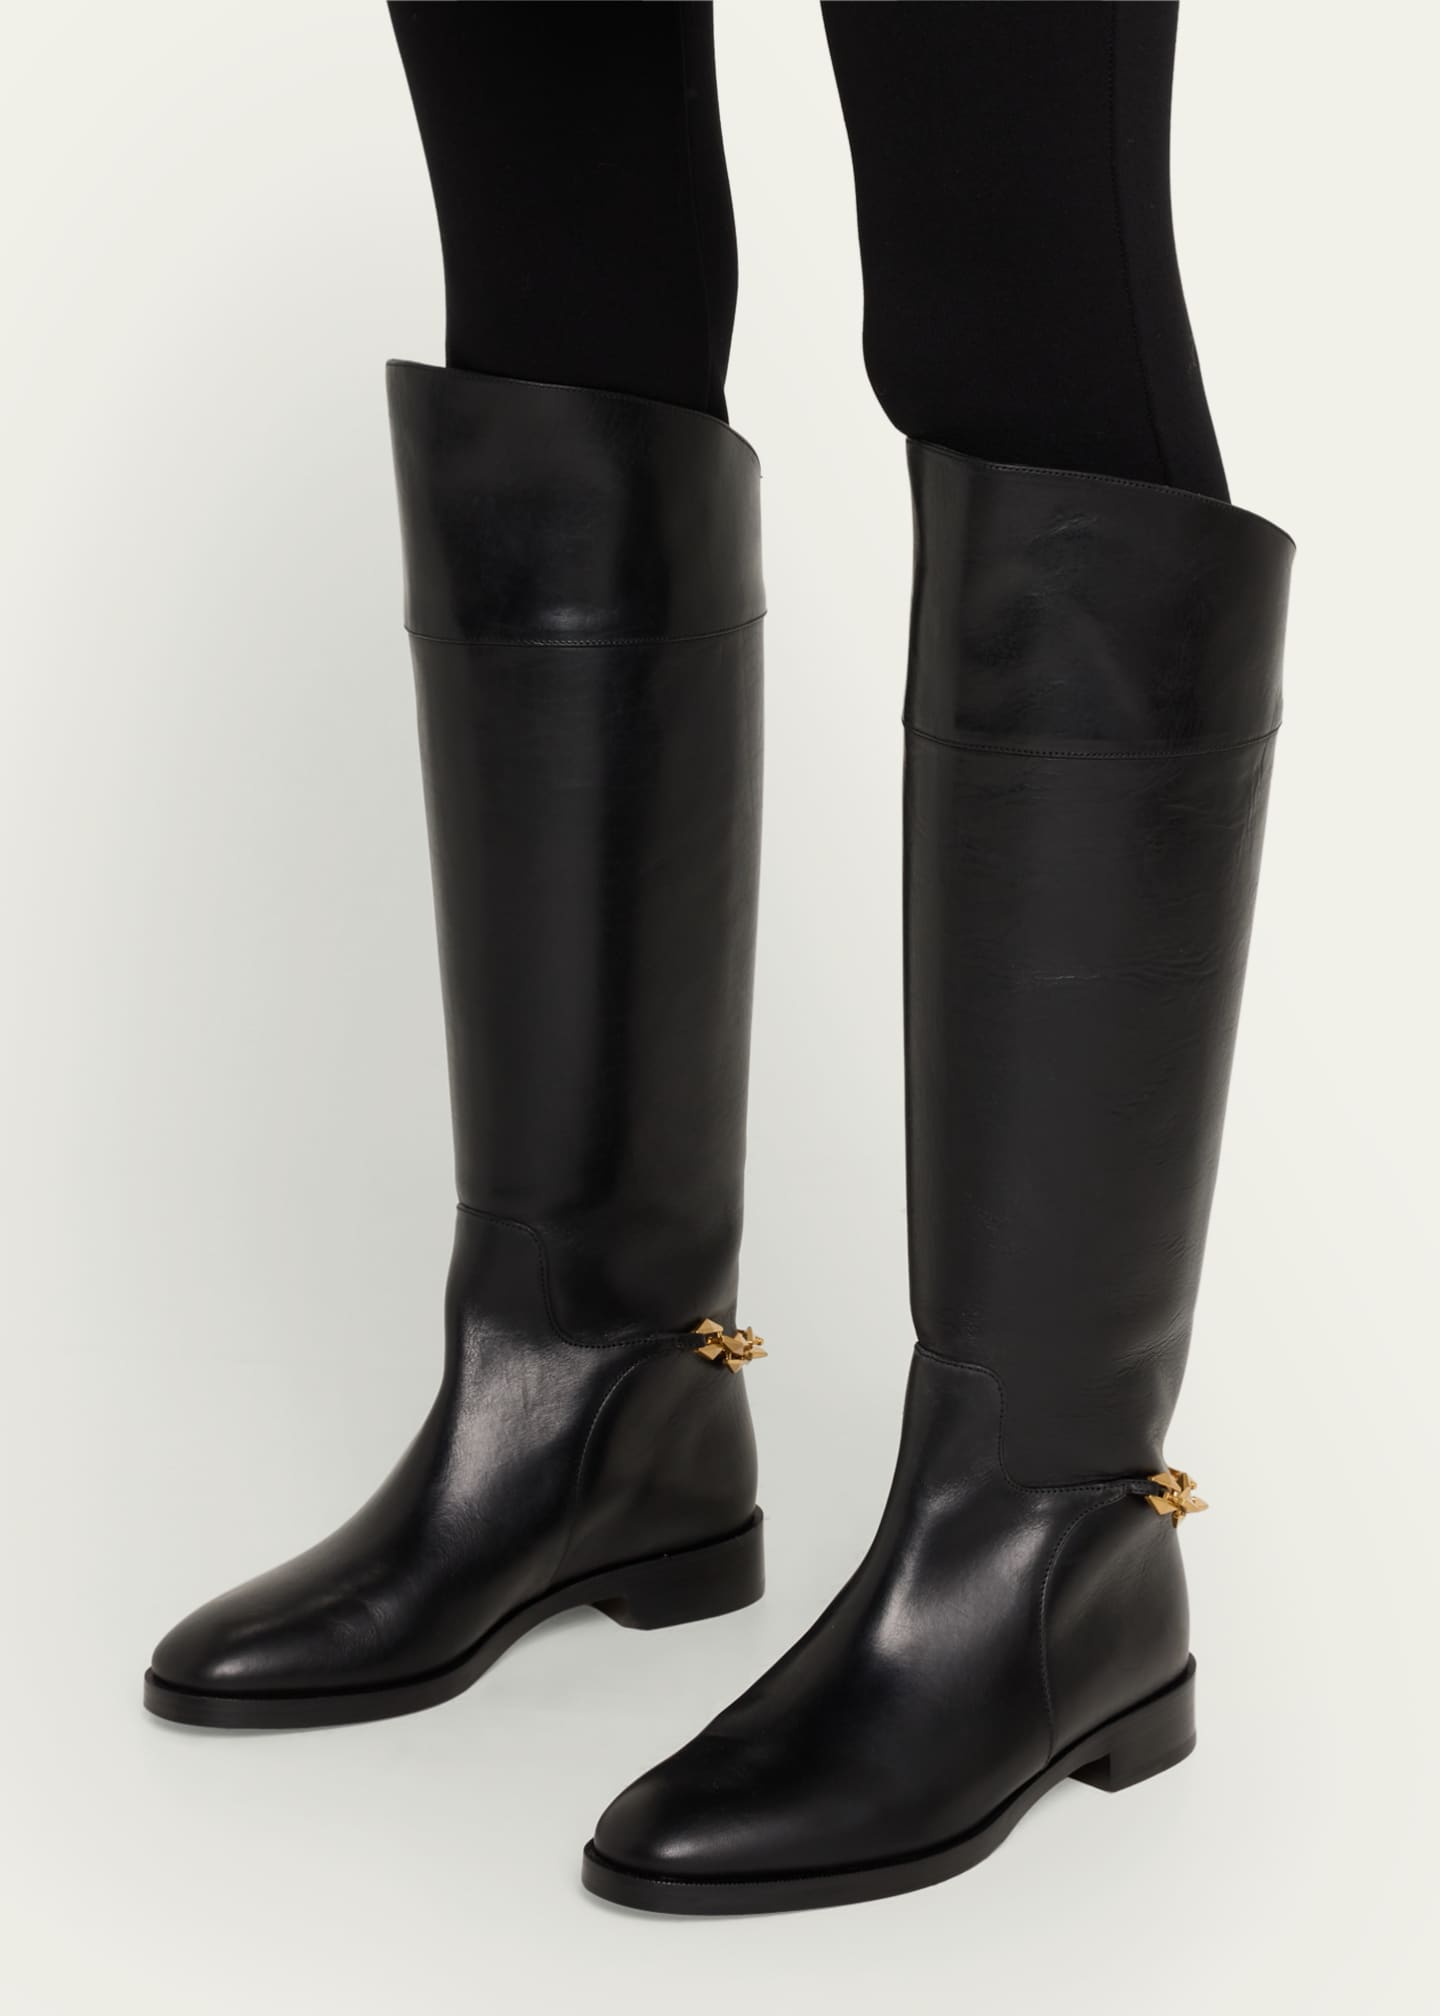 Jimmy Choo Nell Leather Chain Tall Riding Boots - Bergdorf Goodman